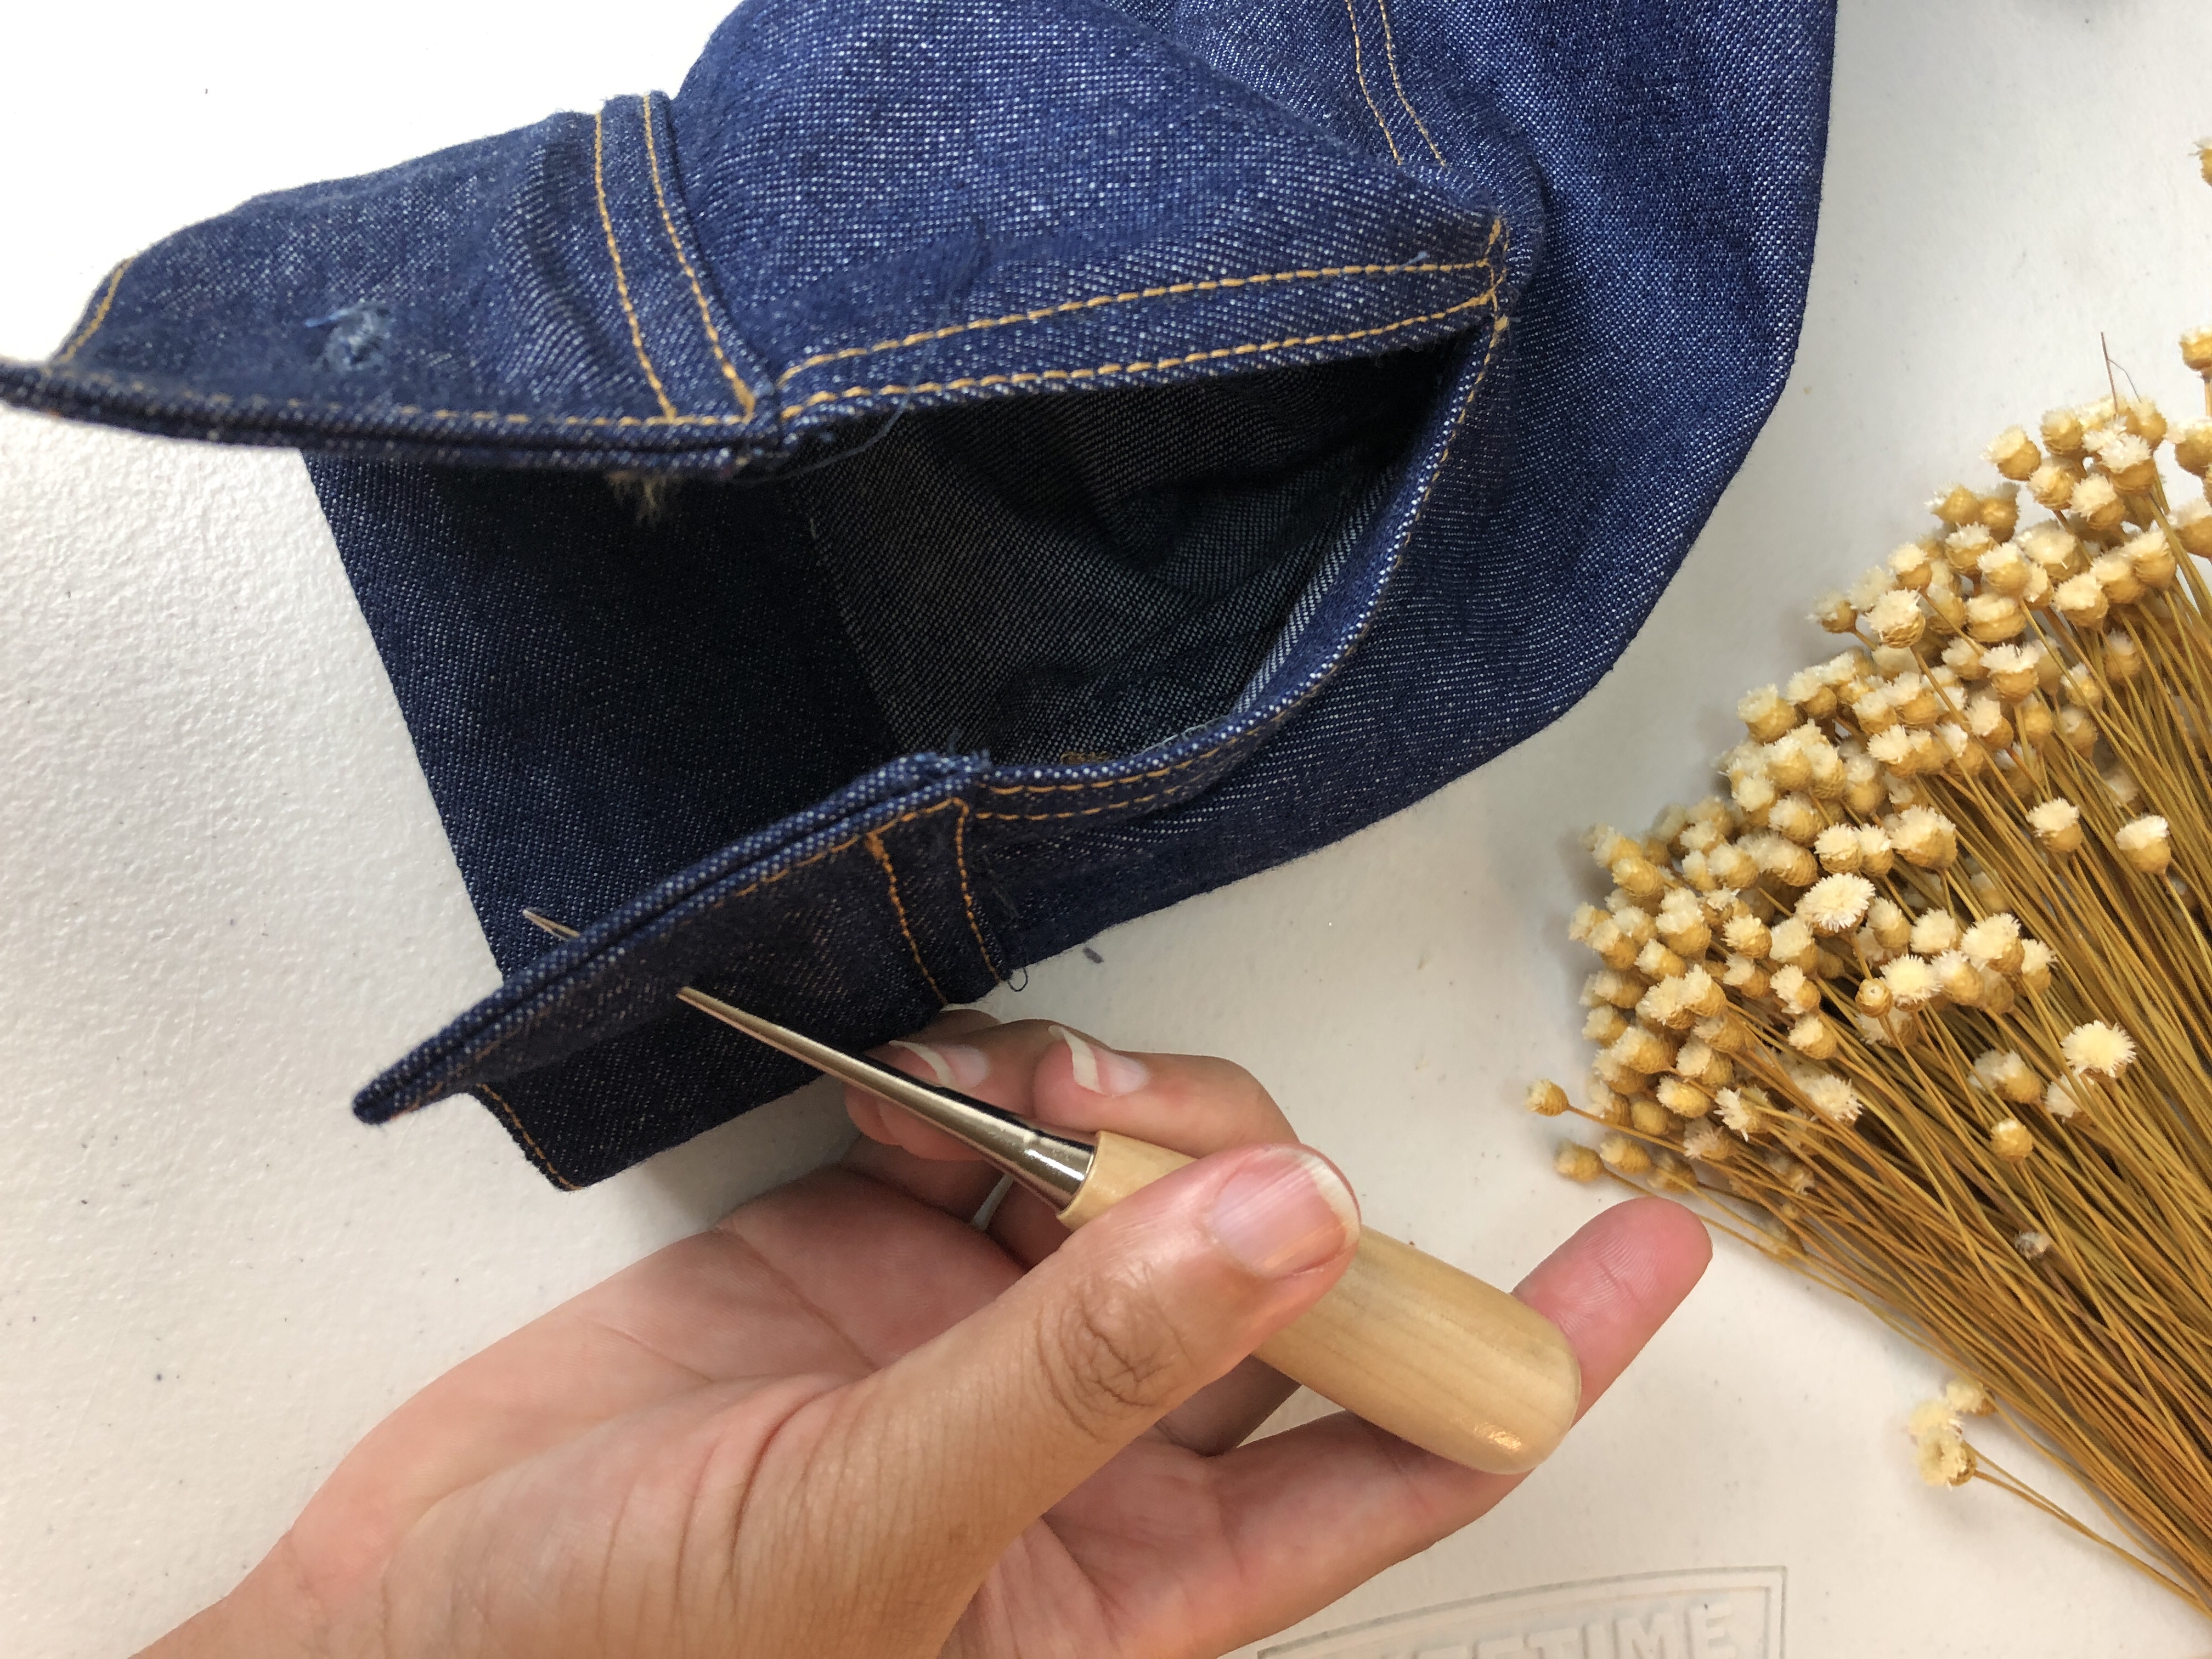 Sewing with Denim Part 2: How to successfully install heavy duty snaps! –  RAVEN MAUREEN